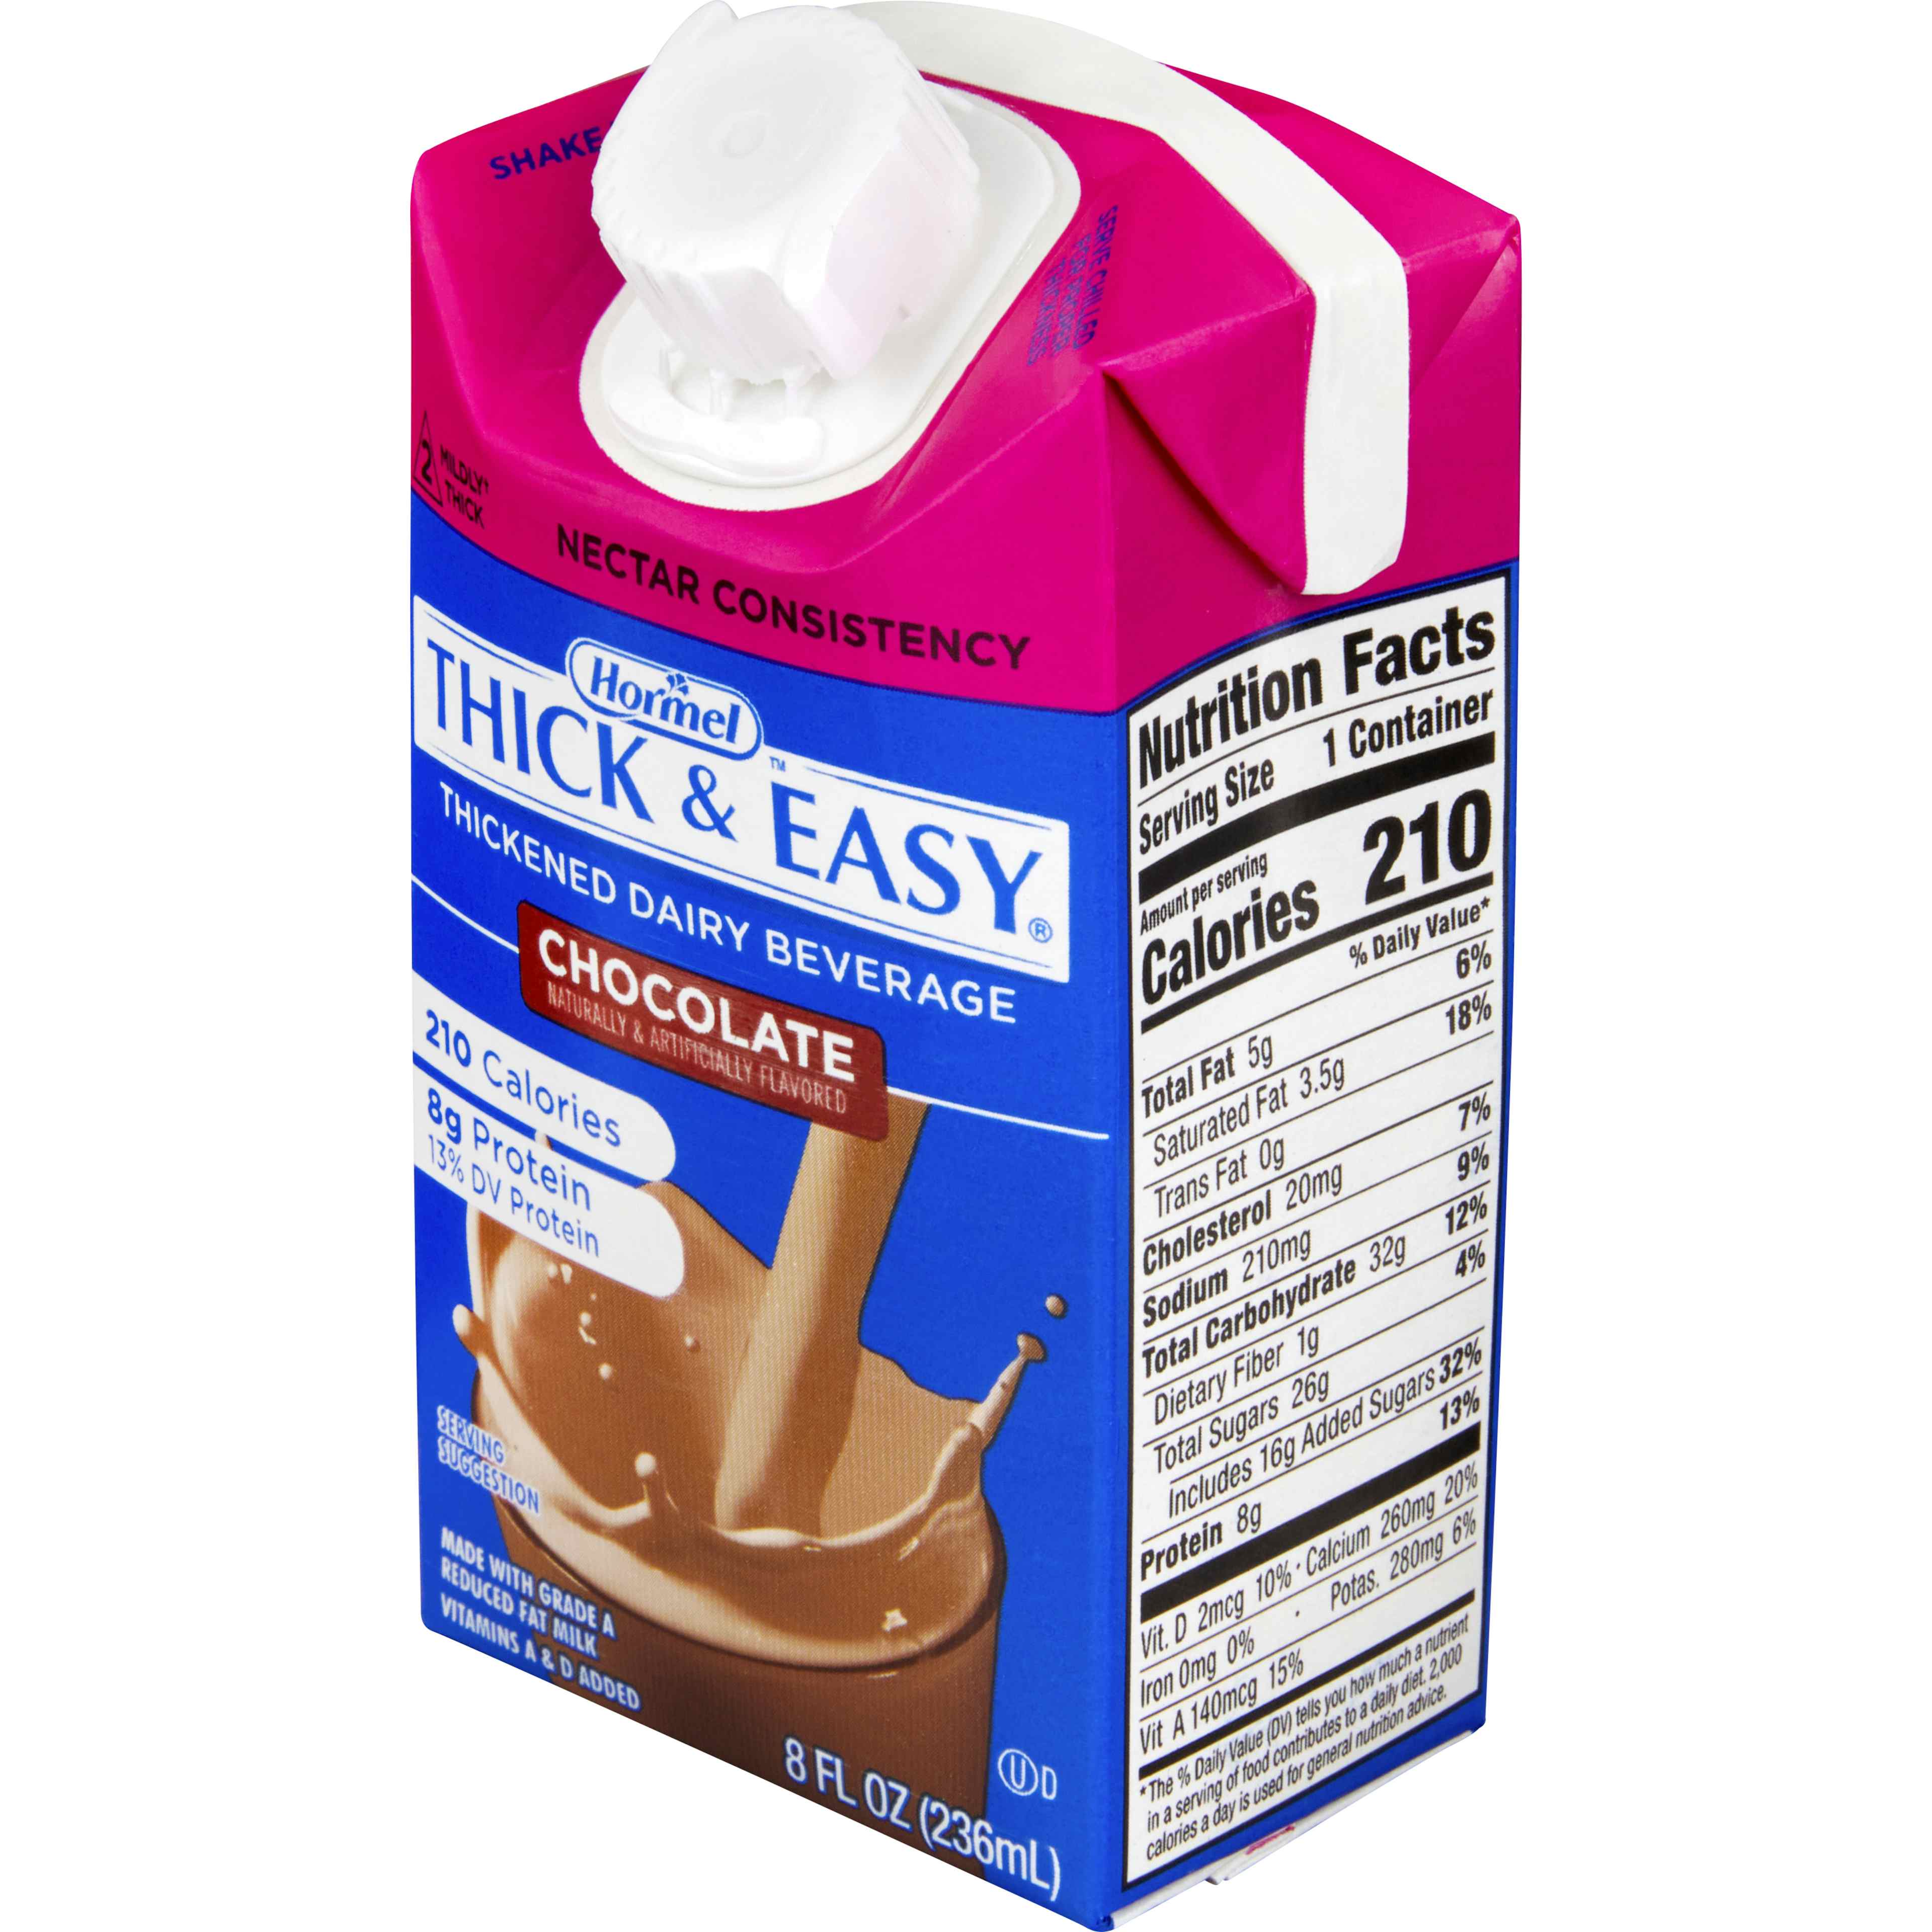 Hormel Thick & Easy Thickened Dairy Beverage, Chocolate, Nectar Consistency, 8 oz.